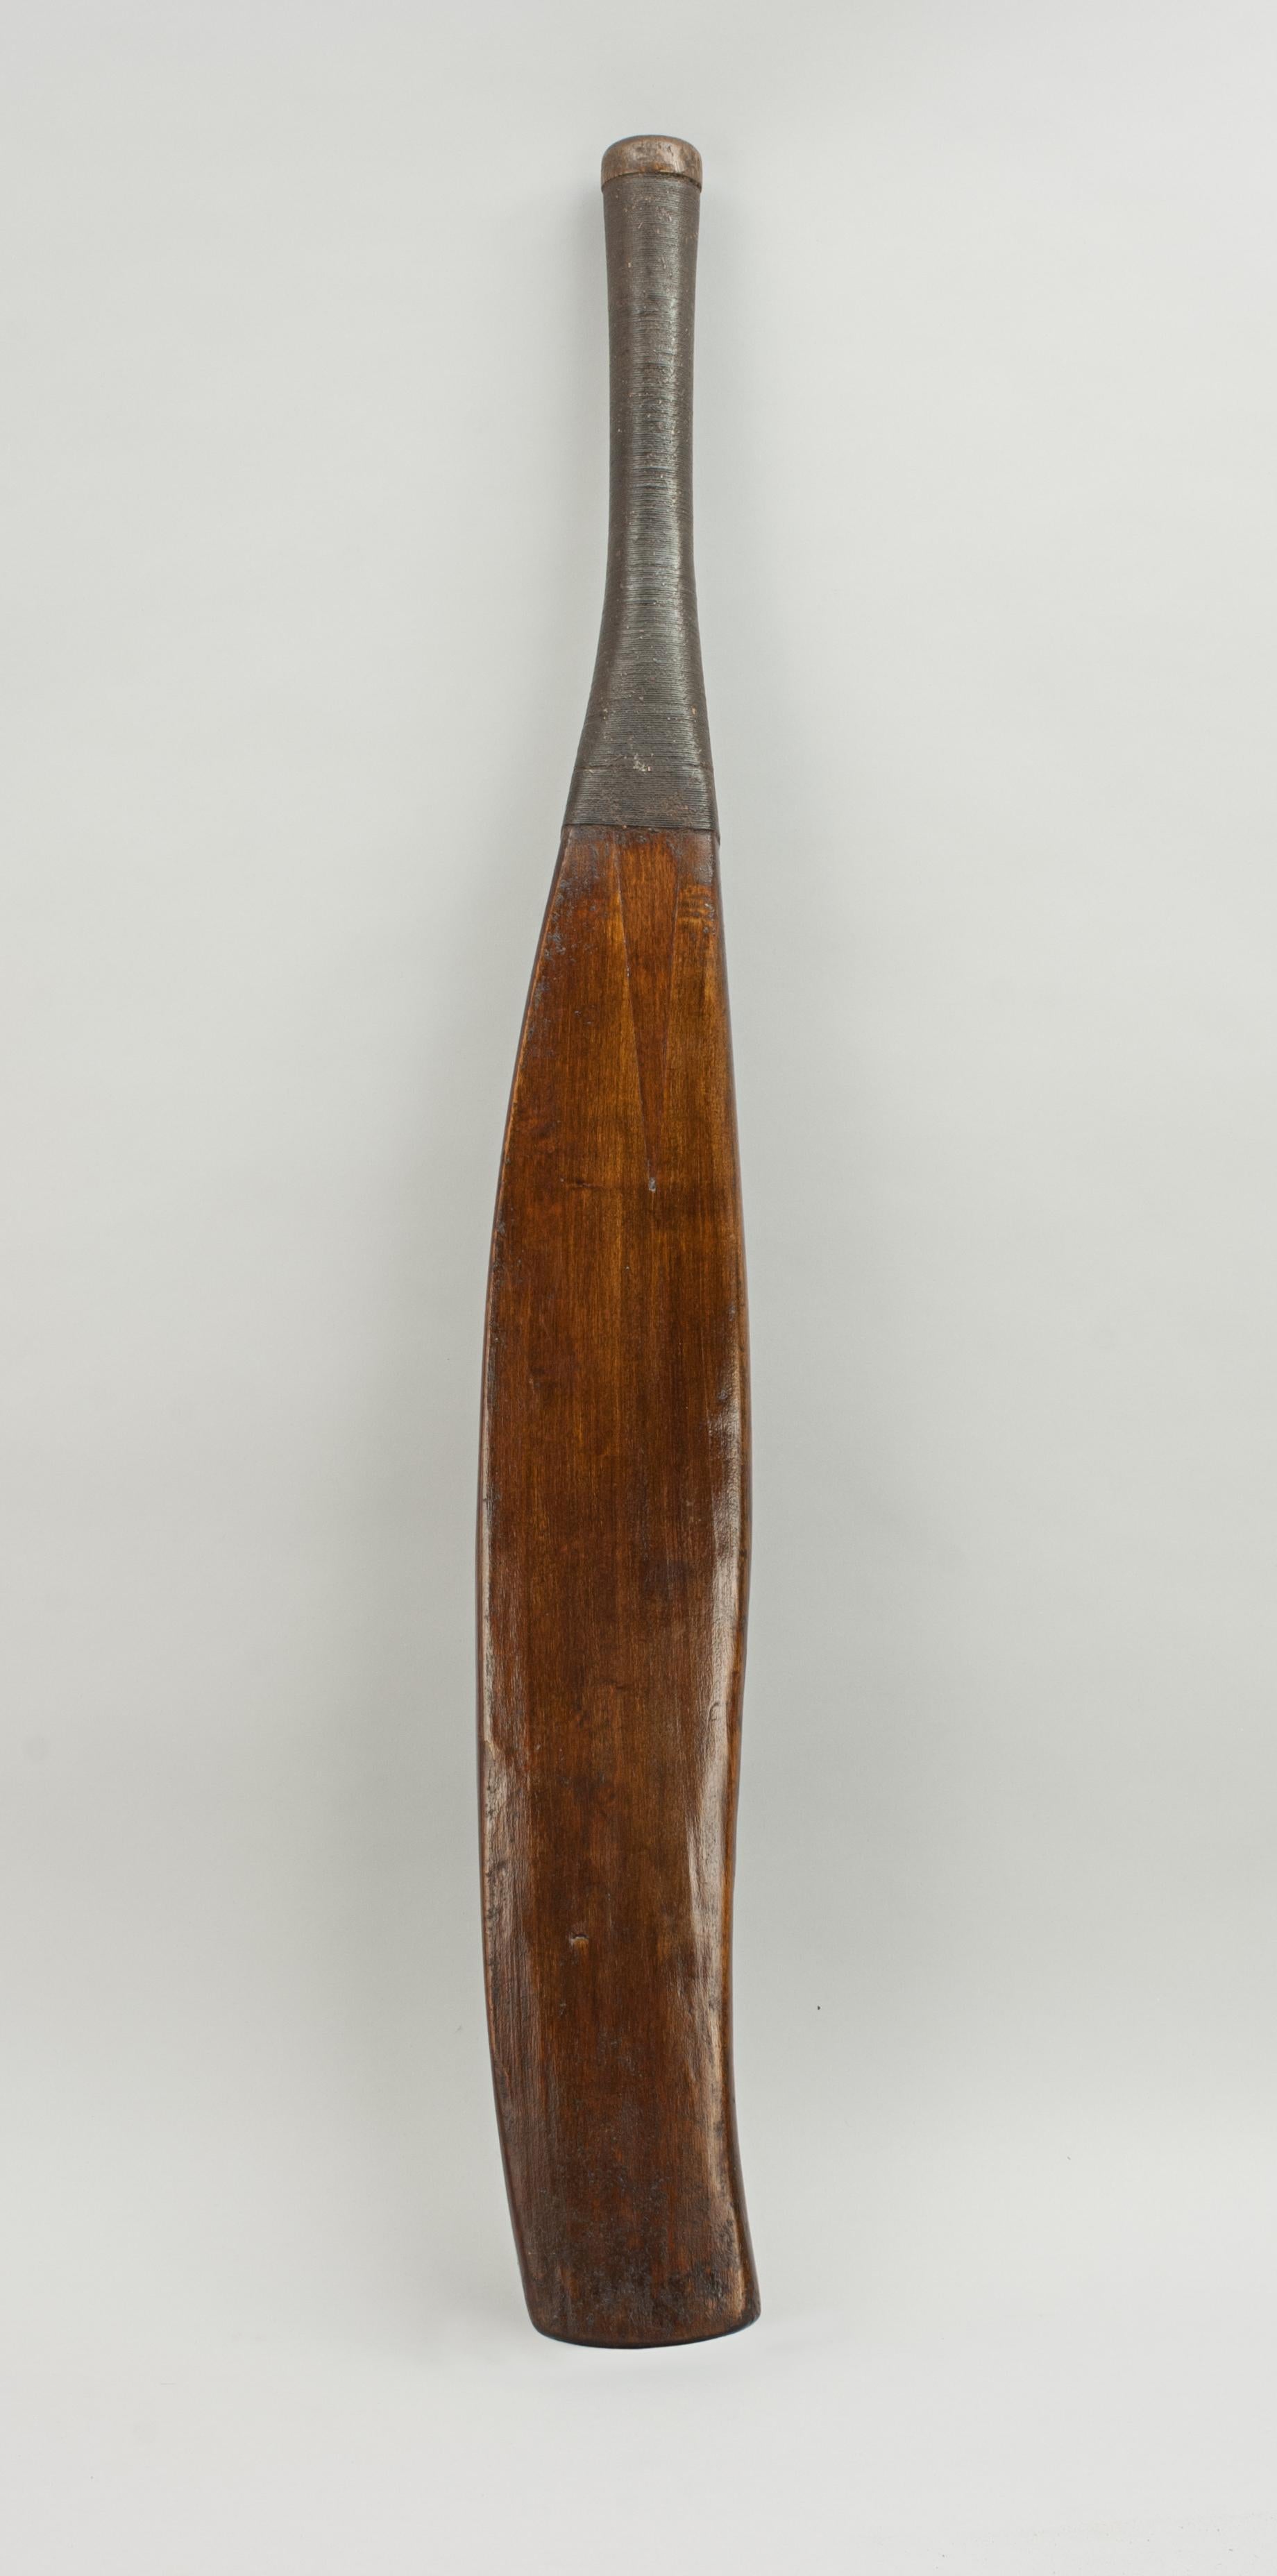 This is a beautiful cricket bat in the shape of an early 18th century cricket bat.
Original bats of this kind are extremely rare. Also this kind of replica is quite rare and hard to find.
A very nice display piece.
 